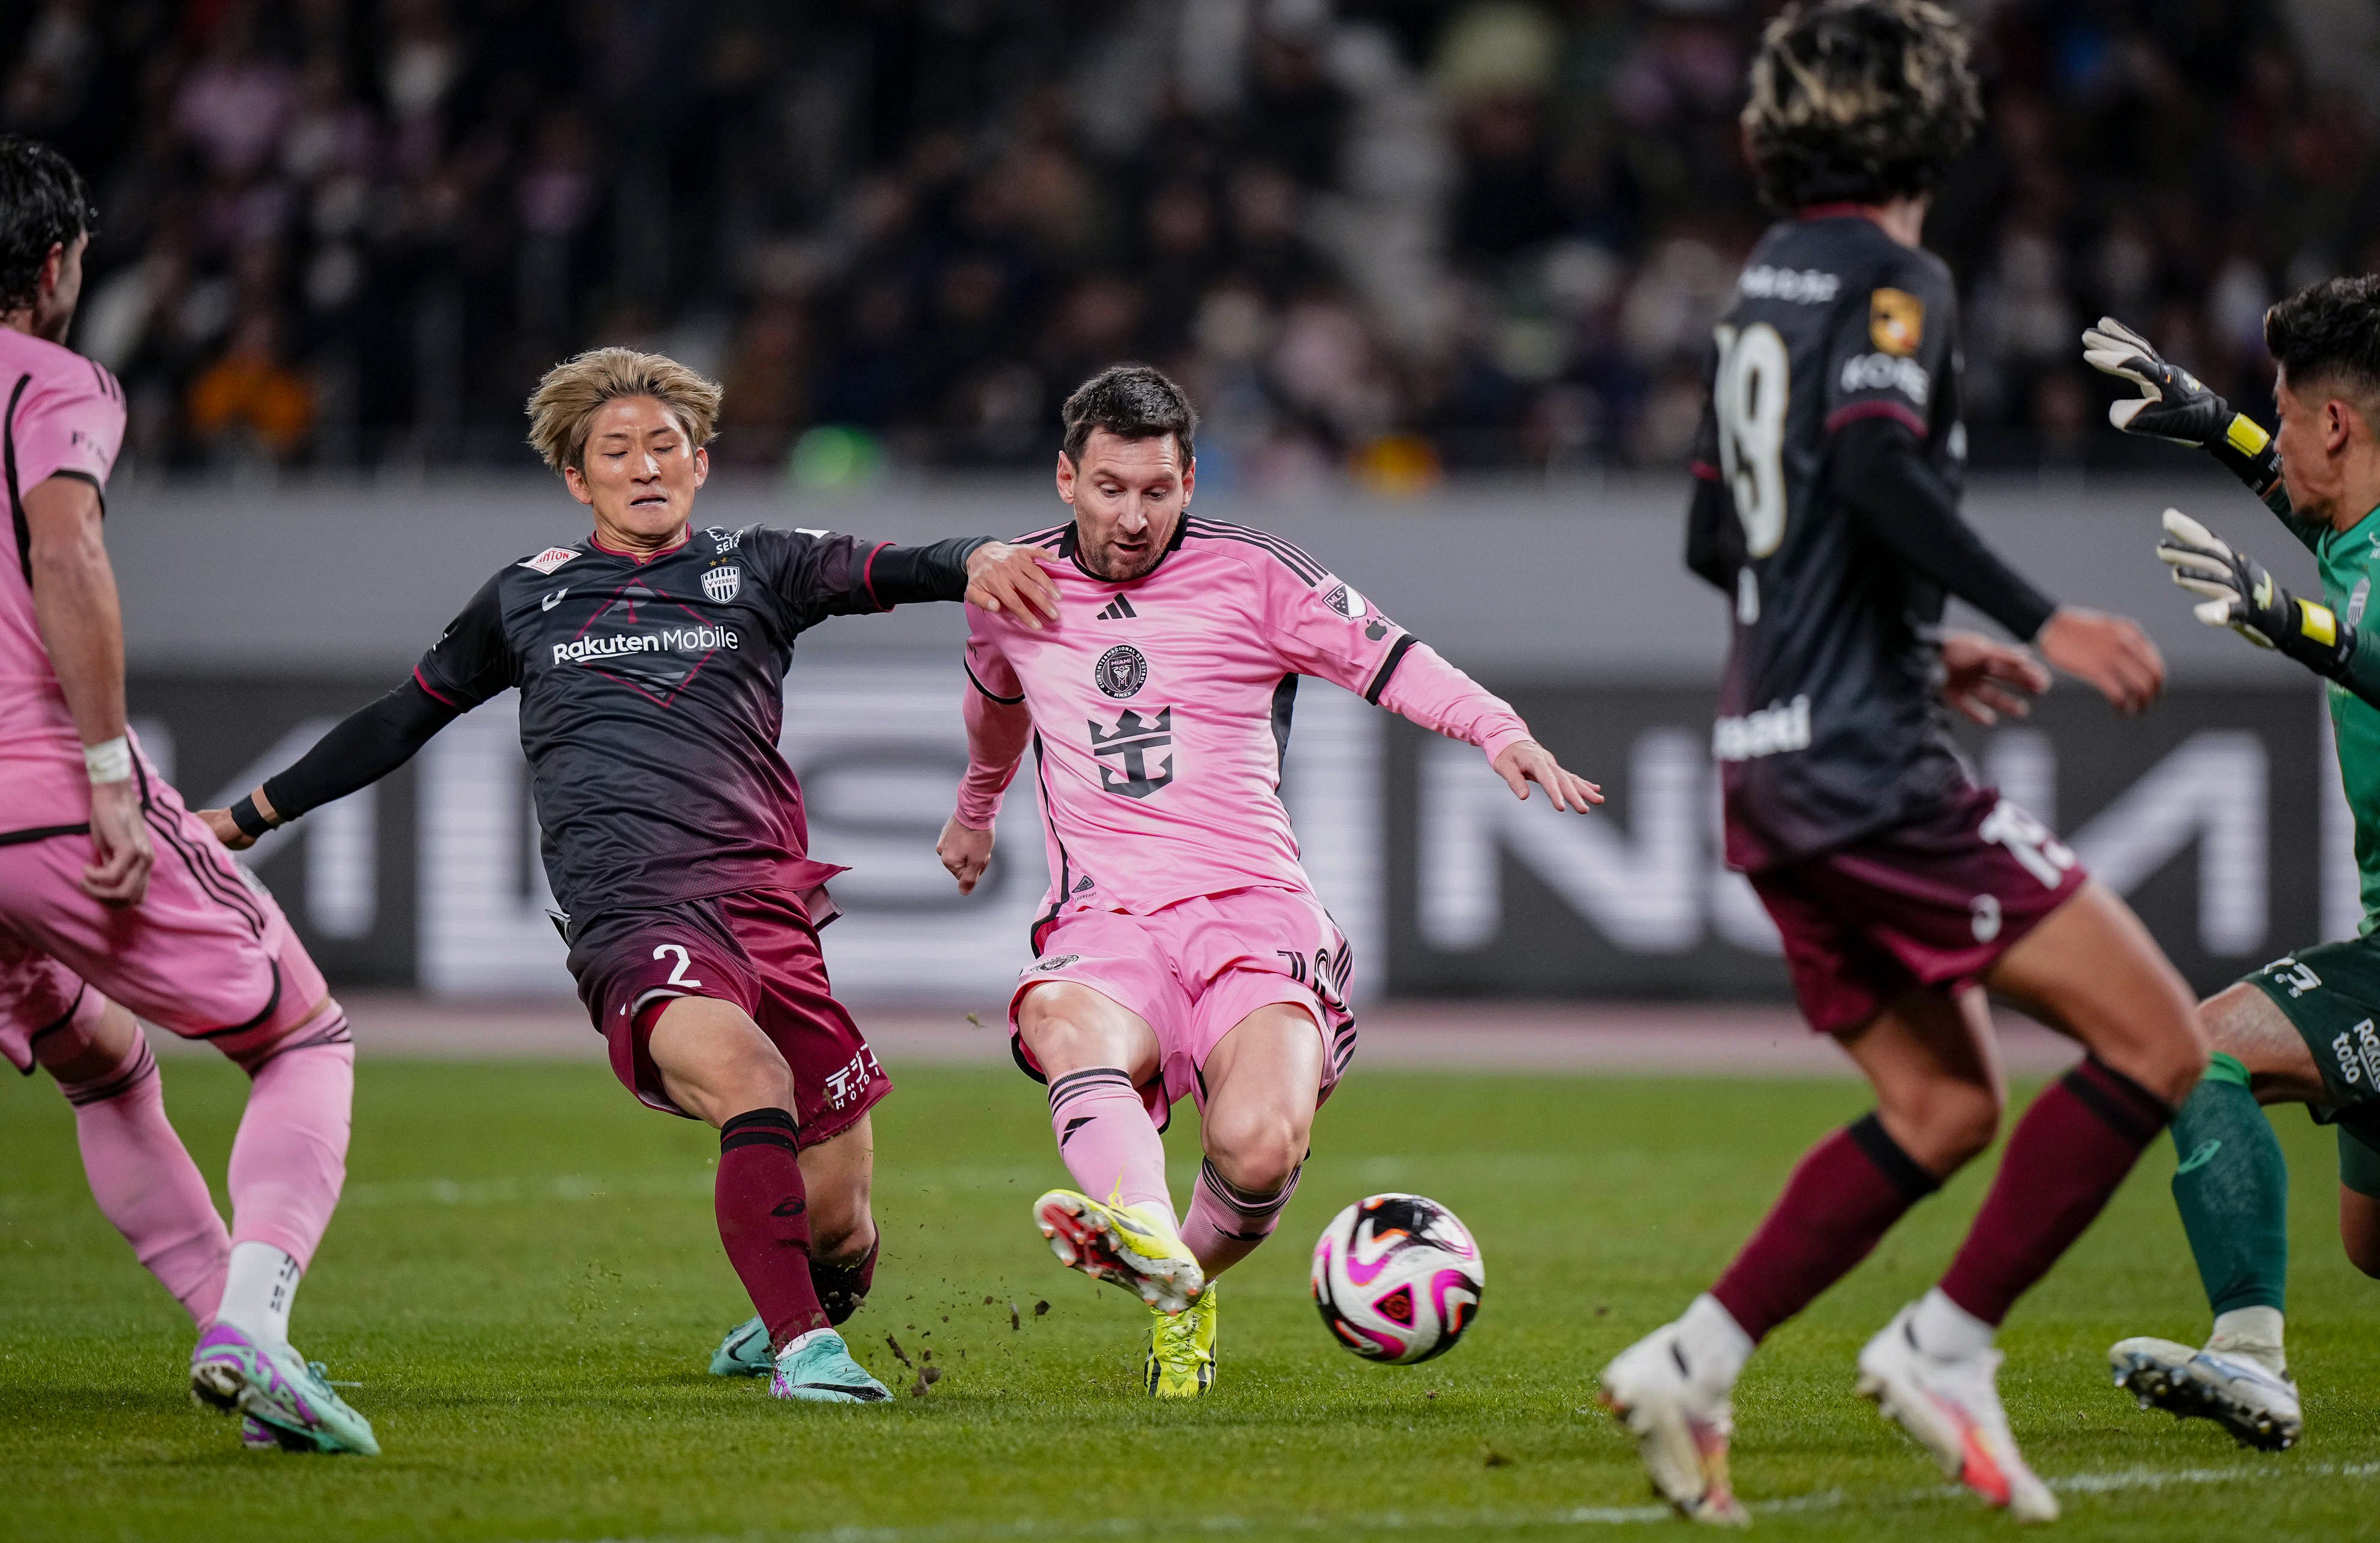 Inter Miami’s Lionel Messi (center) takes a shot against Vissel Kobe.   Messi played in Japan but remained on the bench for the whole game in Hong Kong. Photo: Kyodo